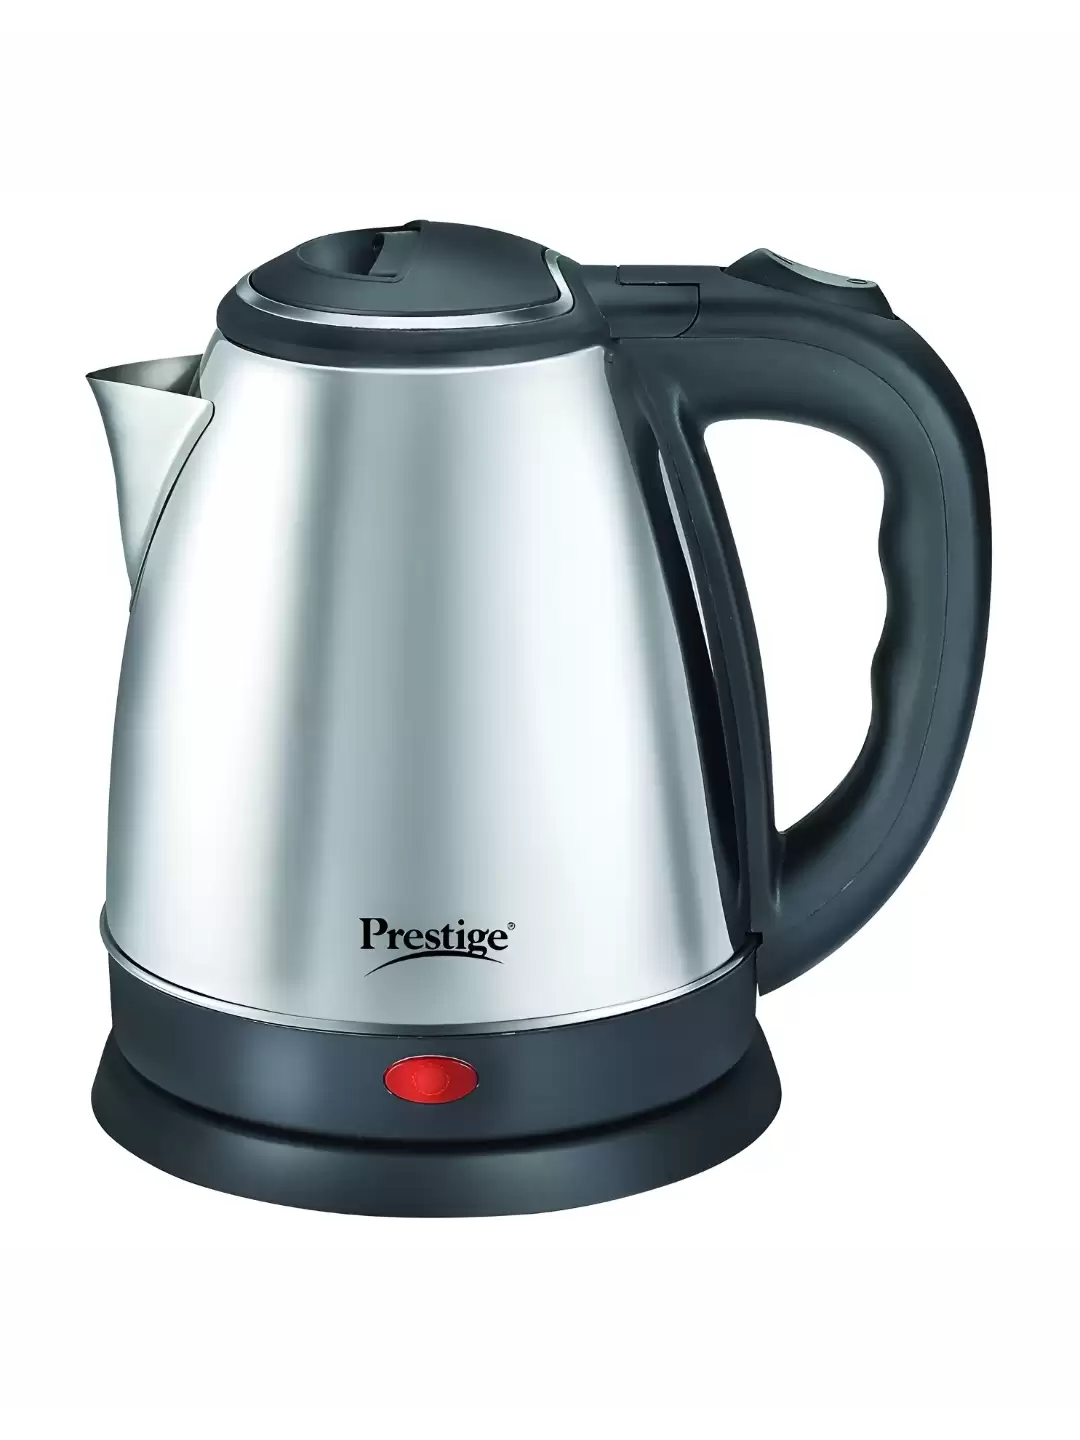 Prestige Steel Electric Kettle Myntra Deal Coupon Get Flat Rs.167 Off